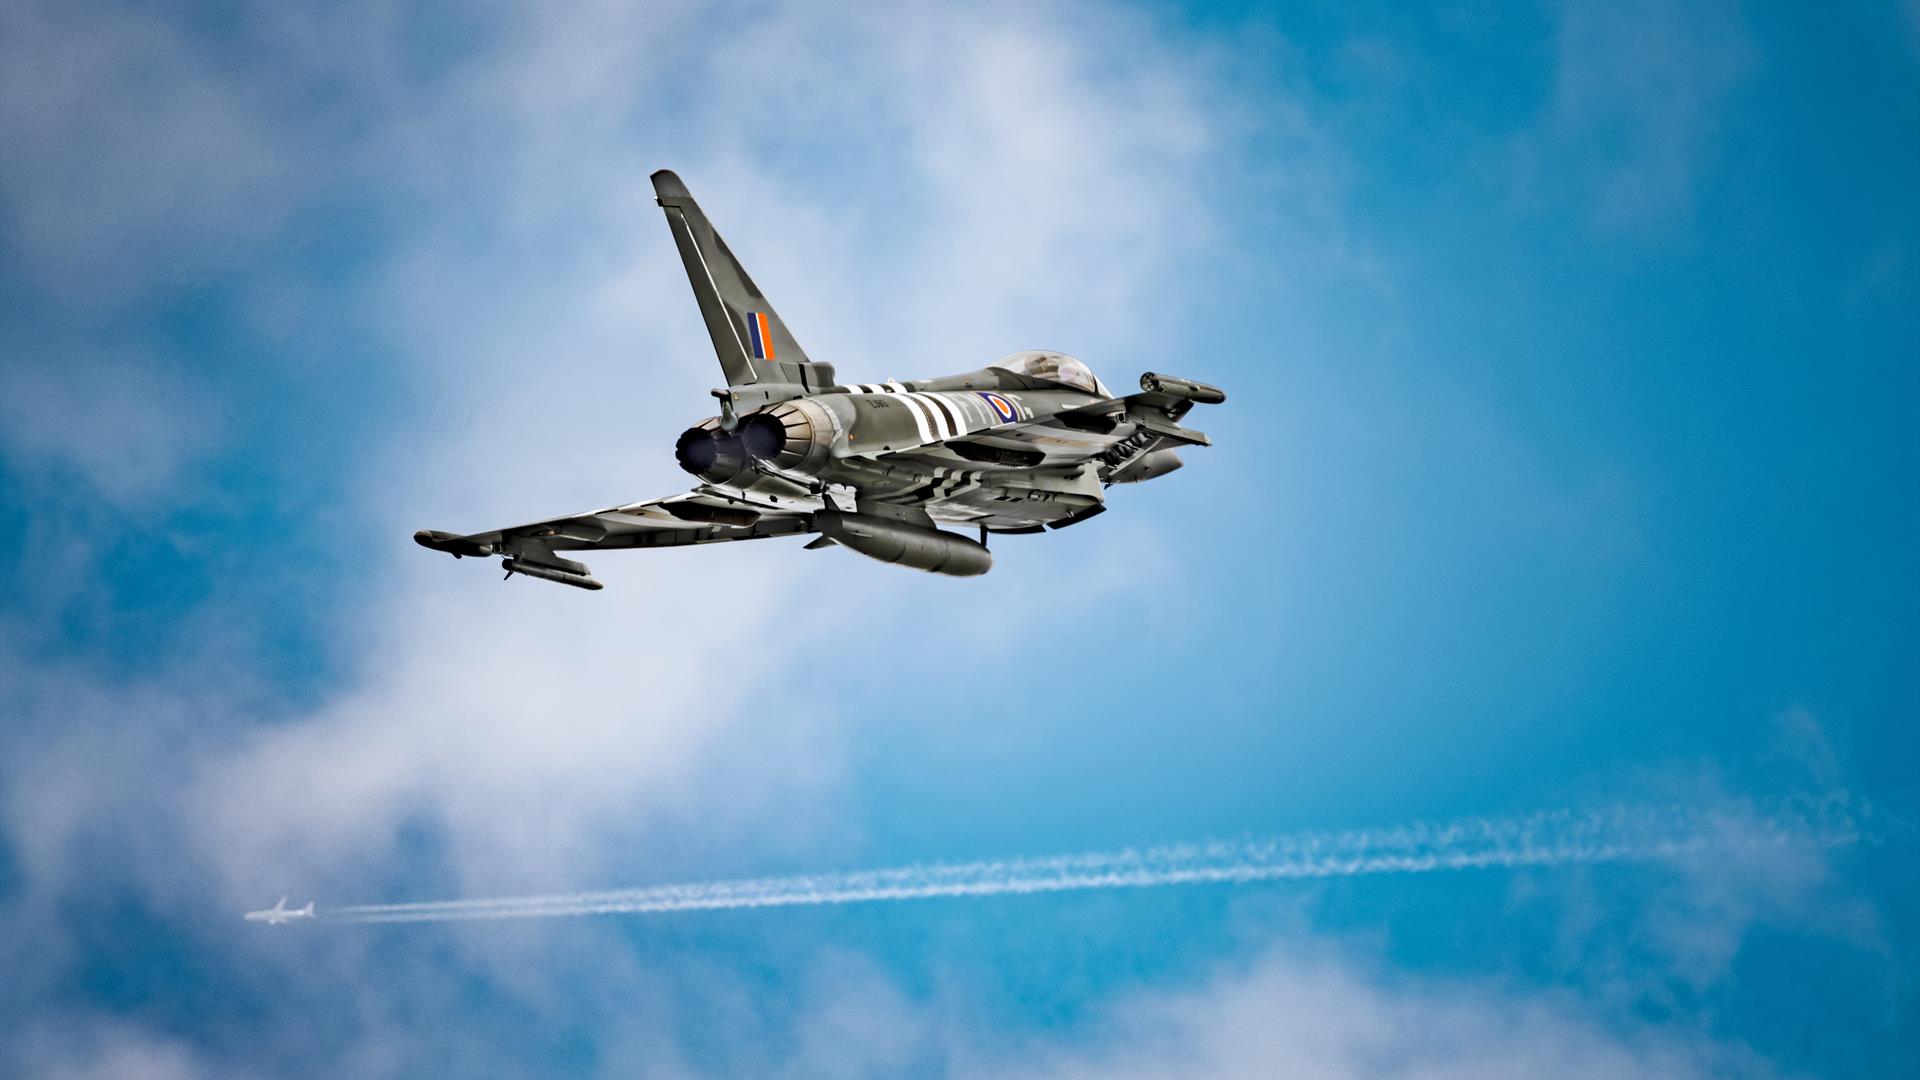 Typhoon at Bournemouth Air Festival - Credit: Squadron Leader Keith Watson